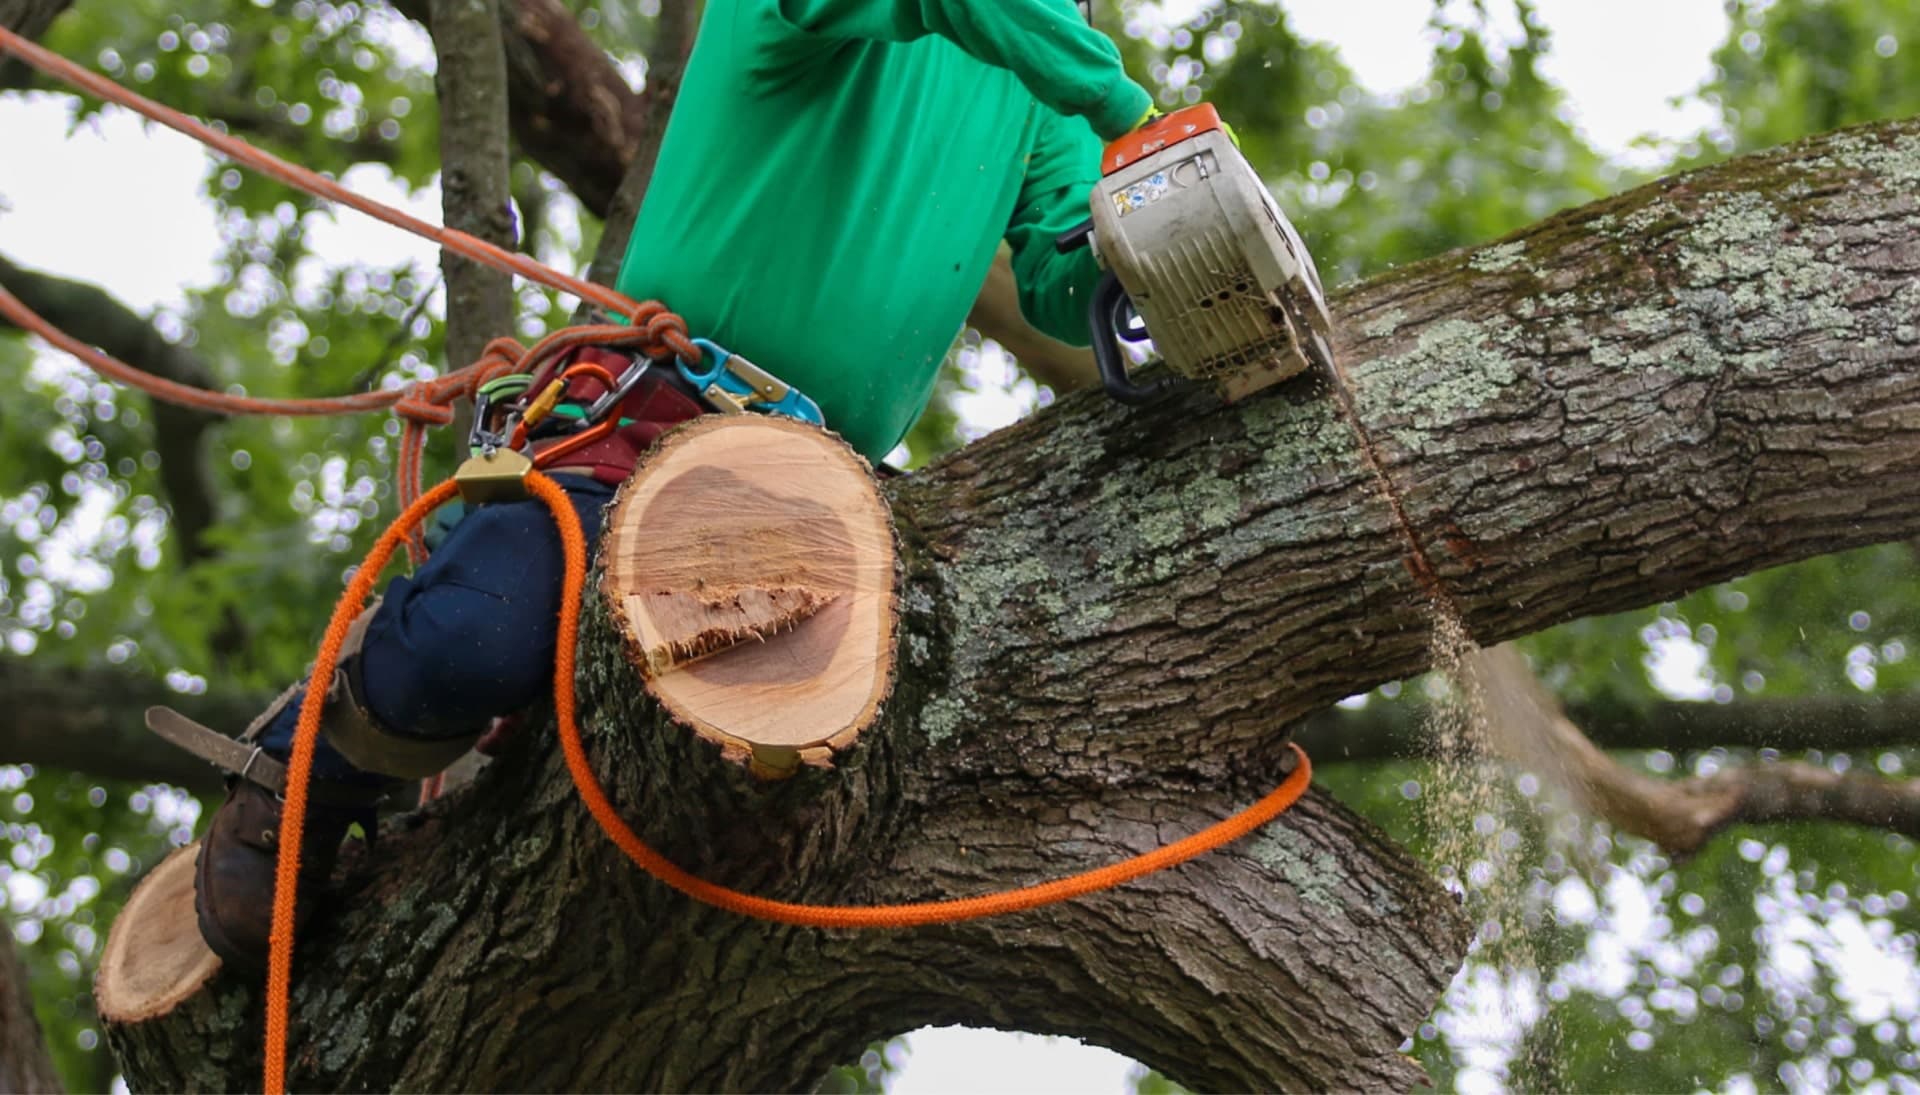 Shed your worries away with best tree removal in Oregon City